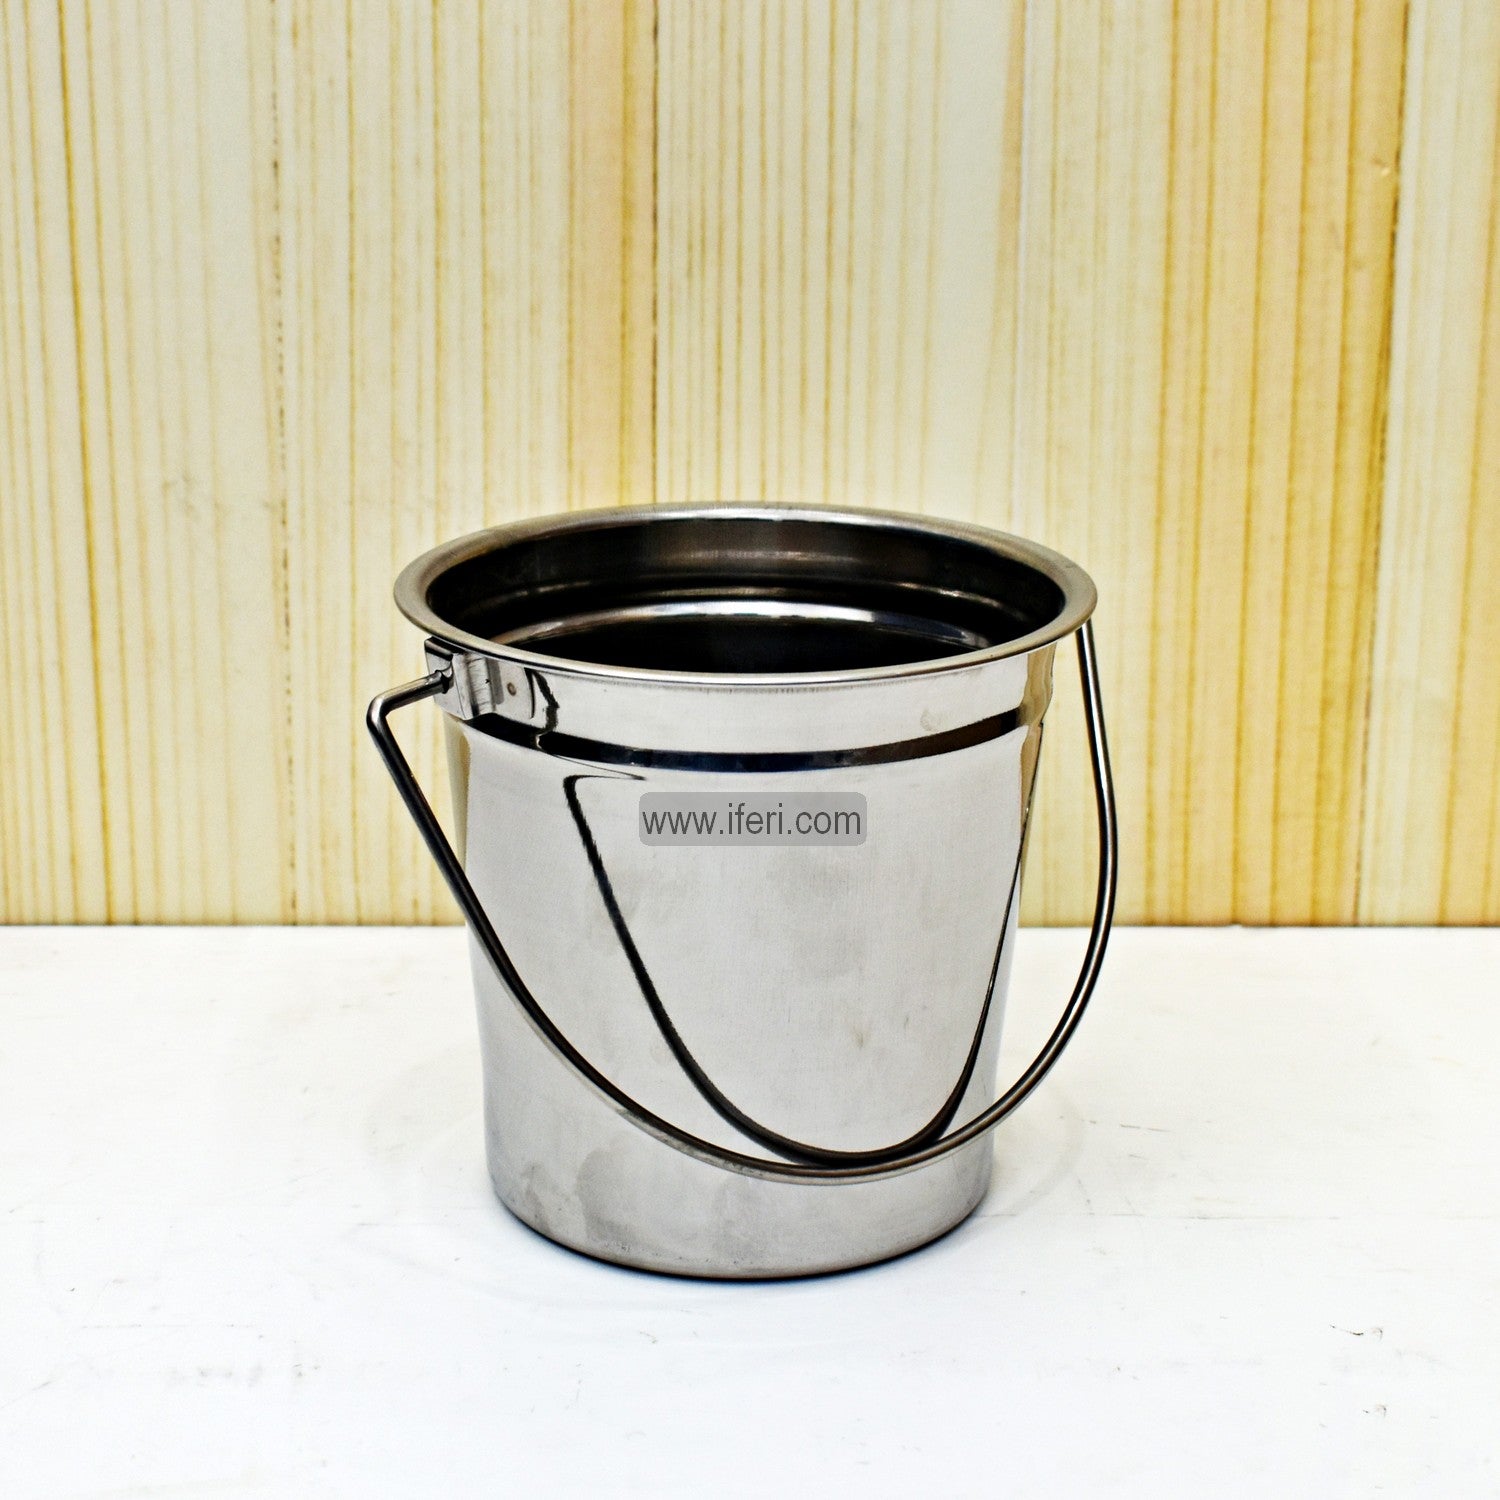 5 Inch Stainless Steel Serving Bucket EB1951